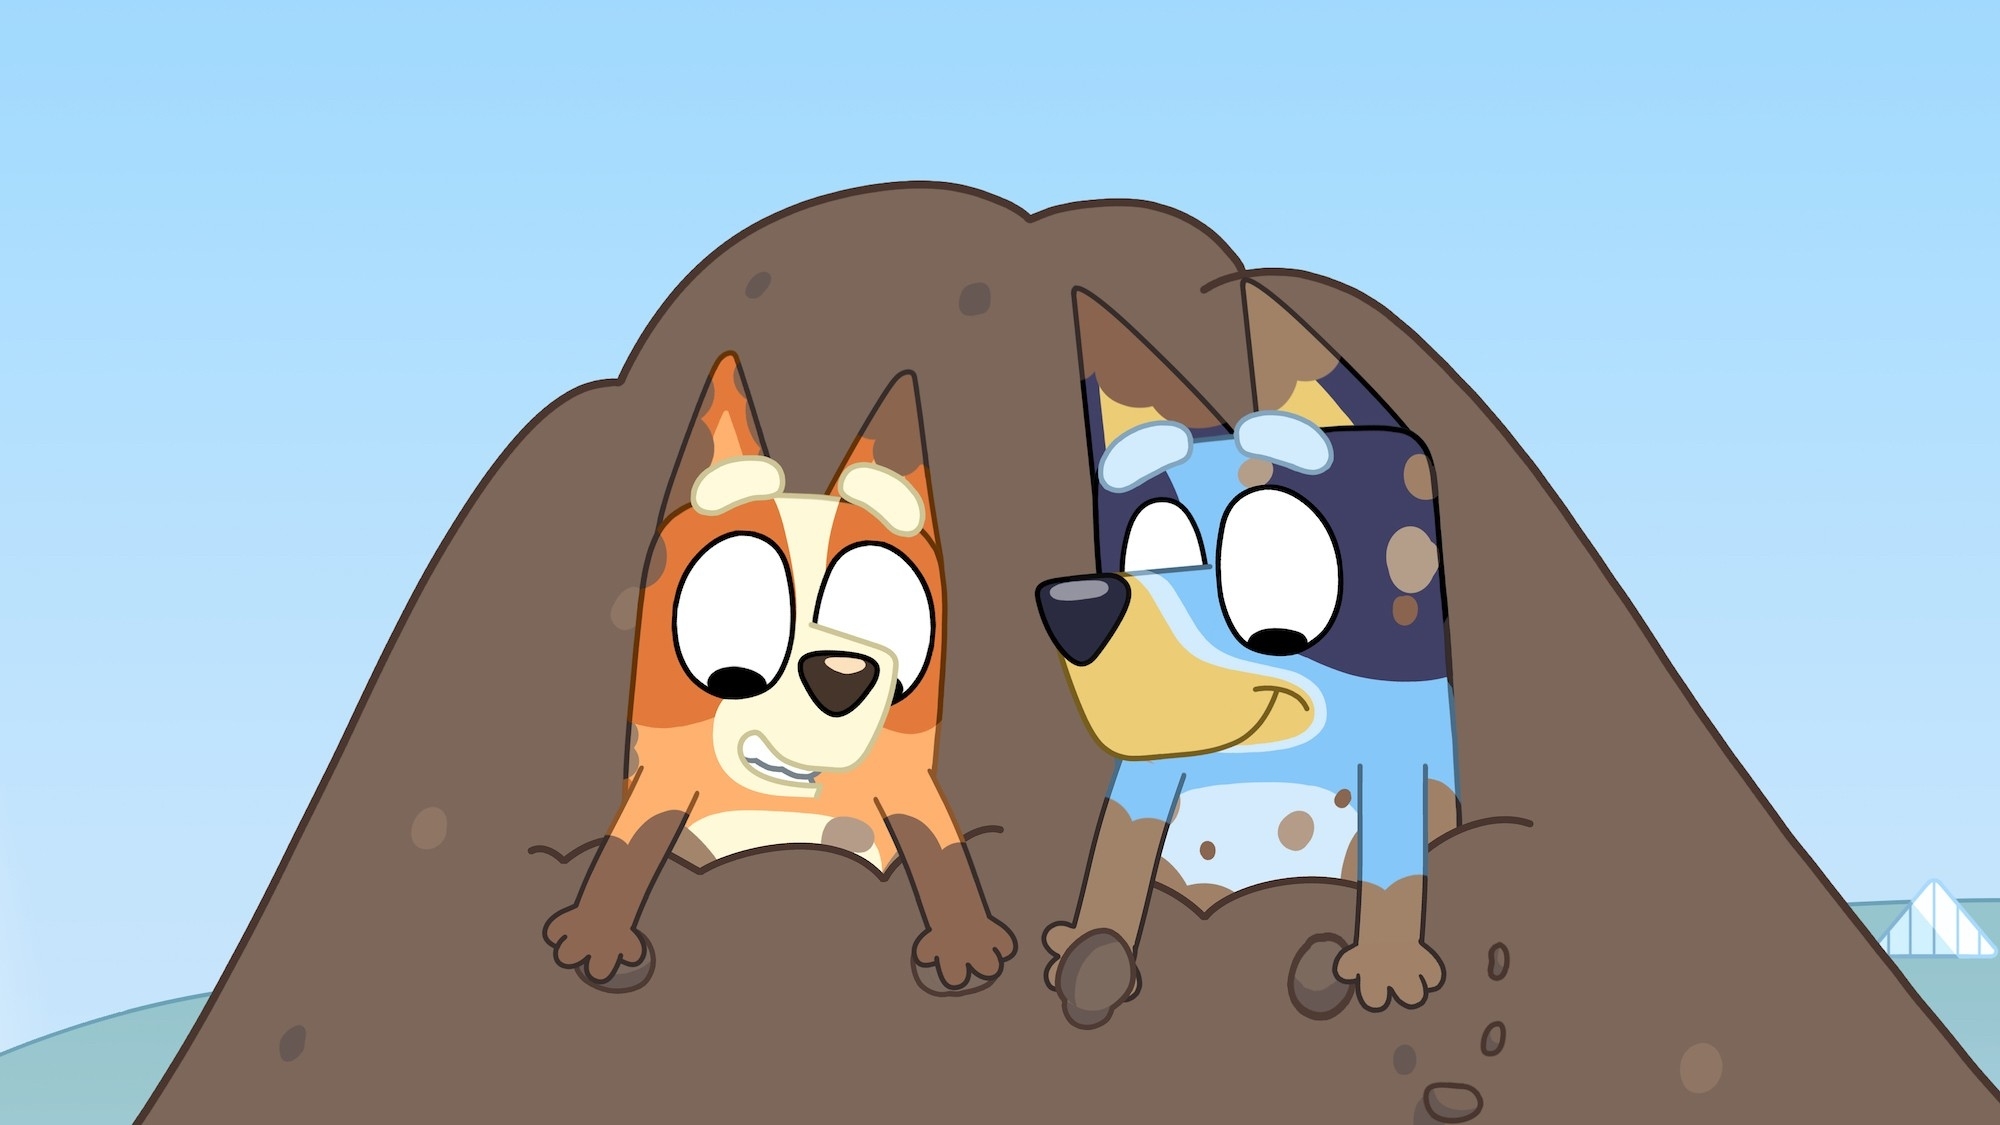 Animated characters Bluey and Bingo peek out from a dirt mound in the show &quot;Bluey.&quot;